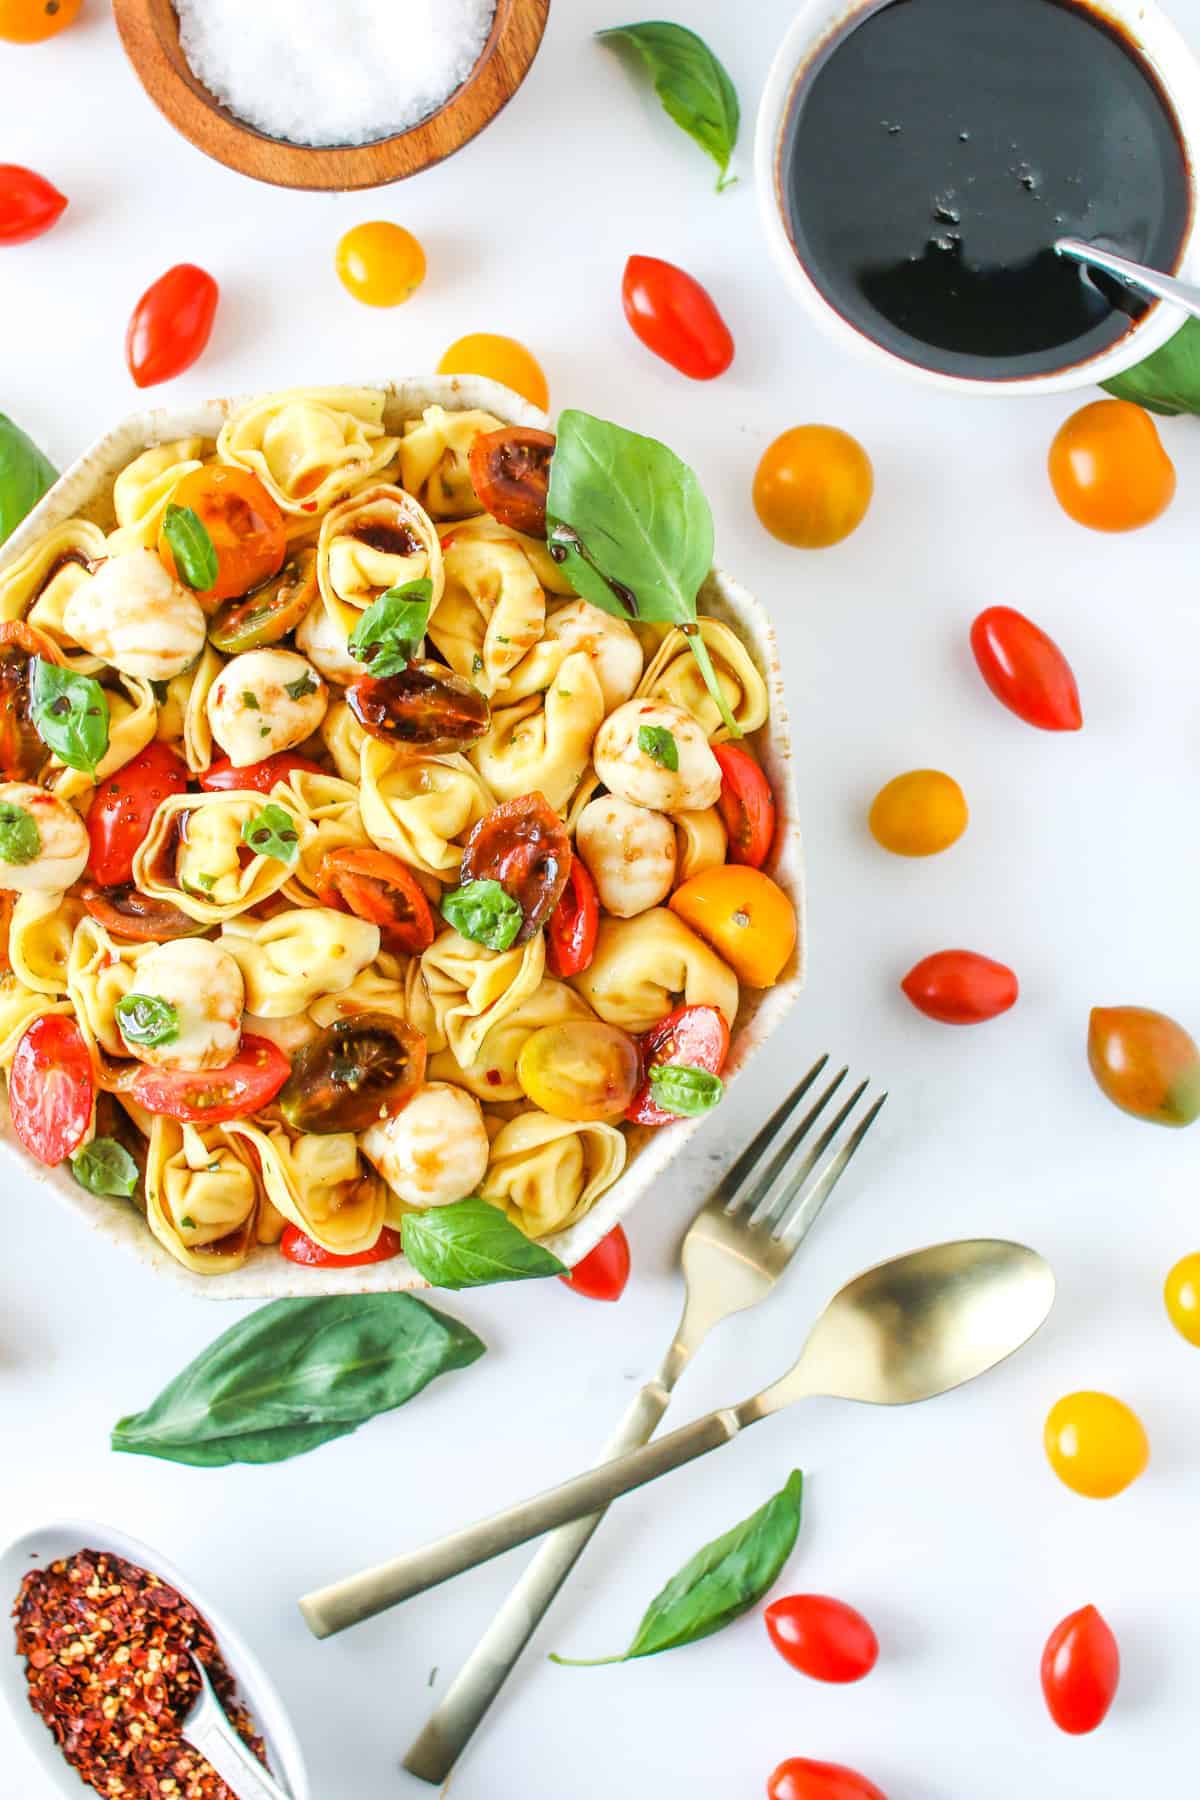 Tortellini Caprese Salad in an octagon bowl with brown speckles with tomatoes, mozzarella and basil leaves on a white marble background with cherry tomatoes, basil, chili flakes in a small white bowl, a gold fork and spoon in the surrounding.